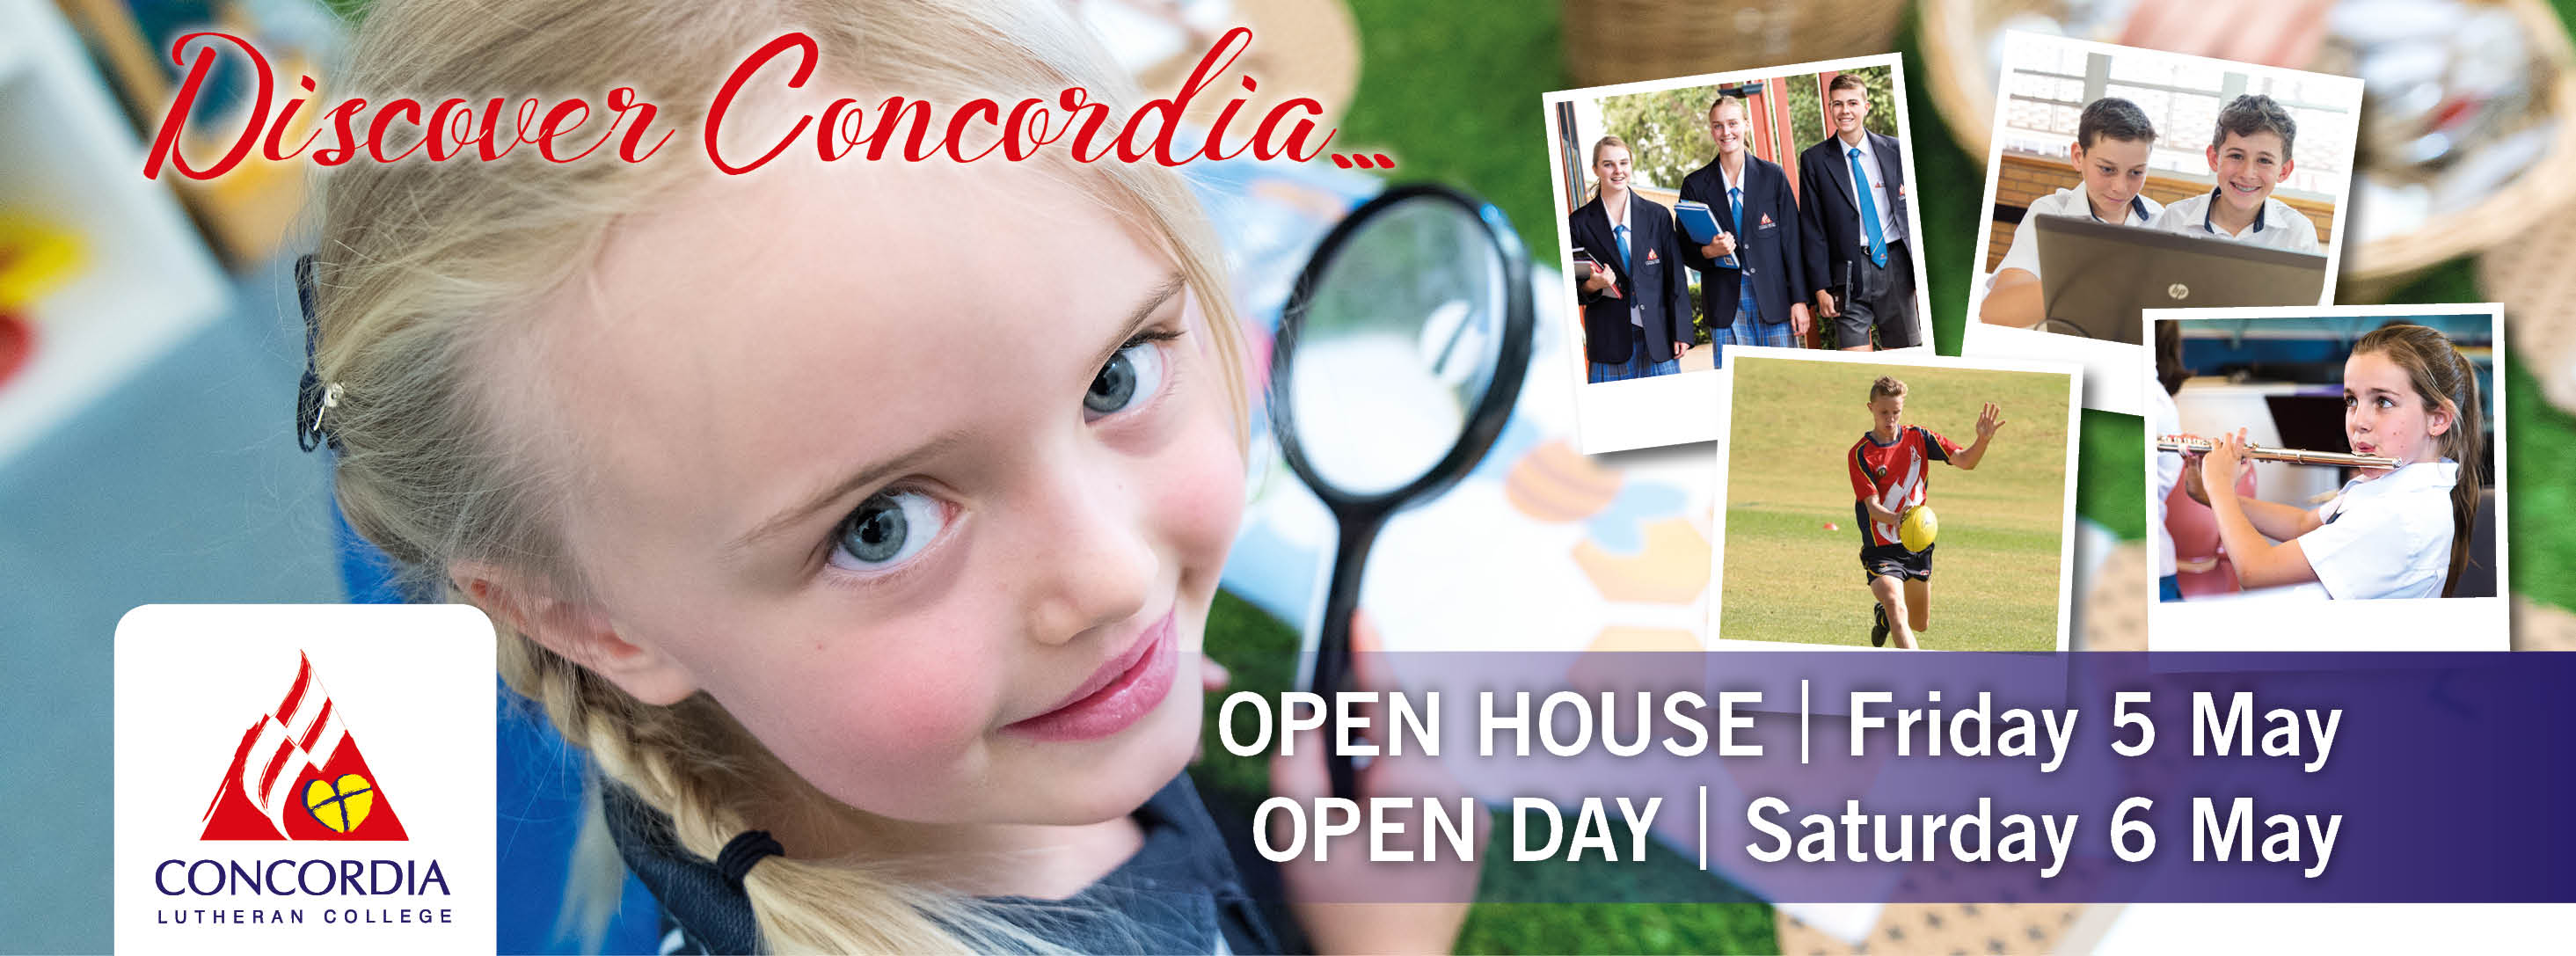 March 2017_Open Day_FB banner.jpg